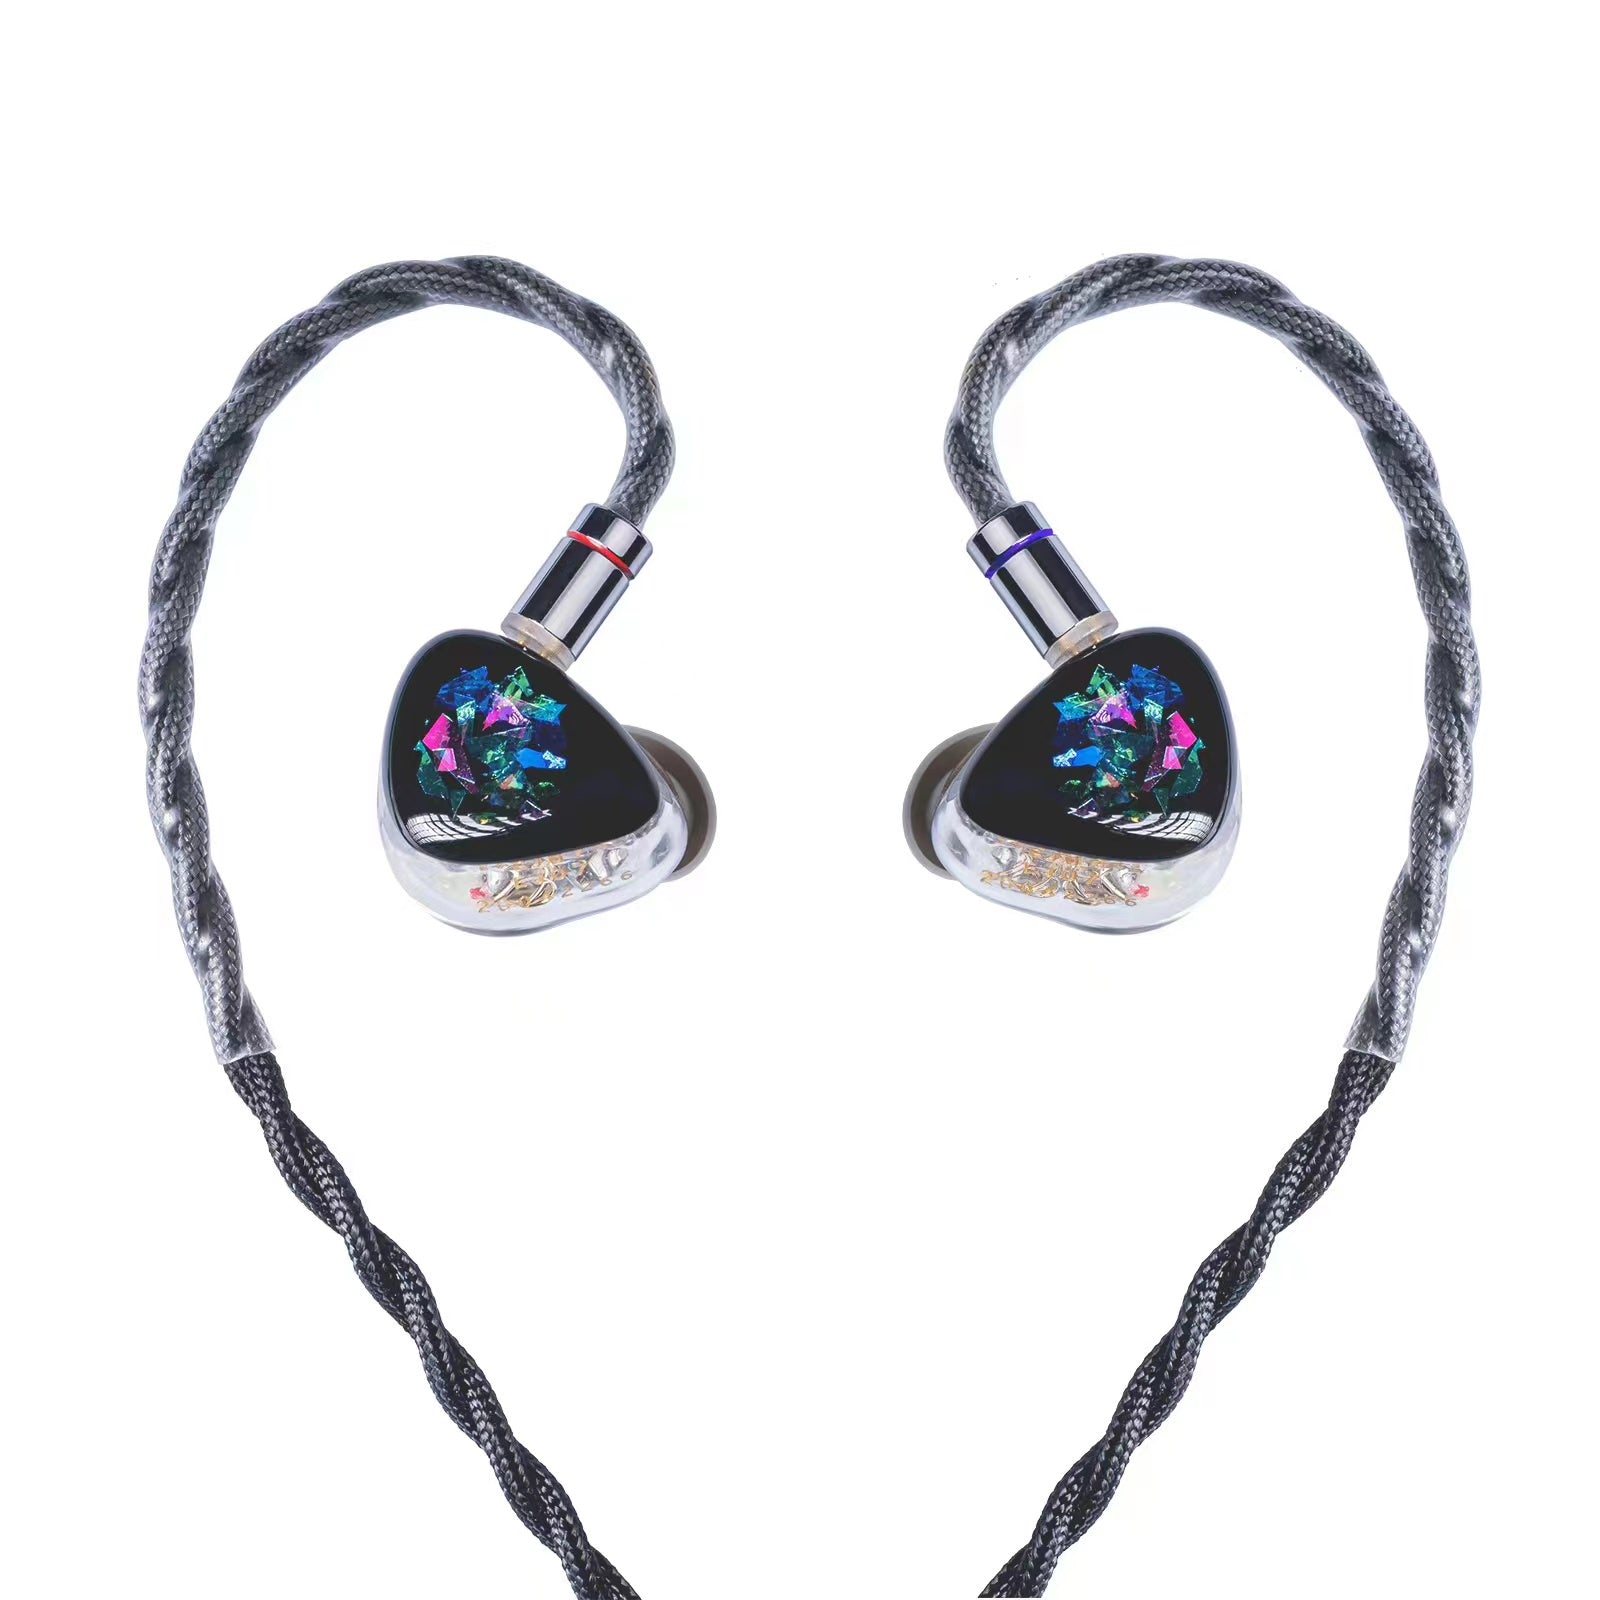 EJ07 - Best musicians in ear monitors for classic and symphony